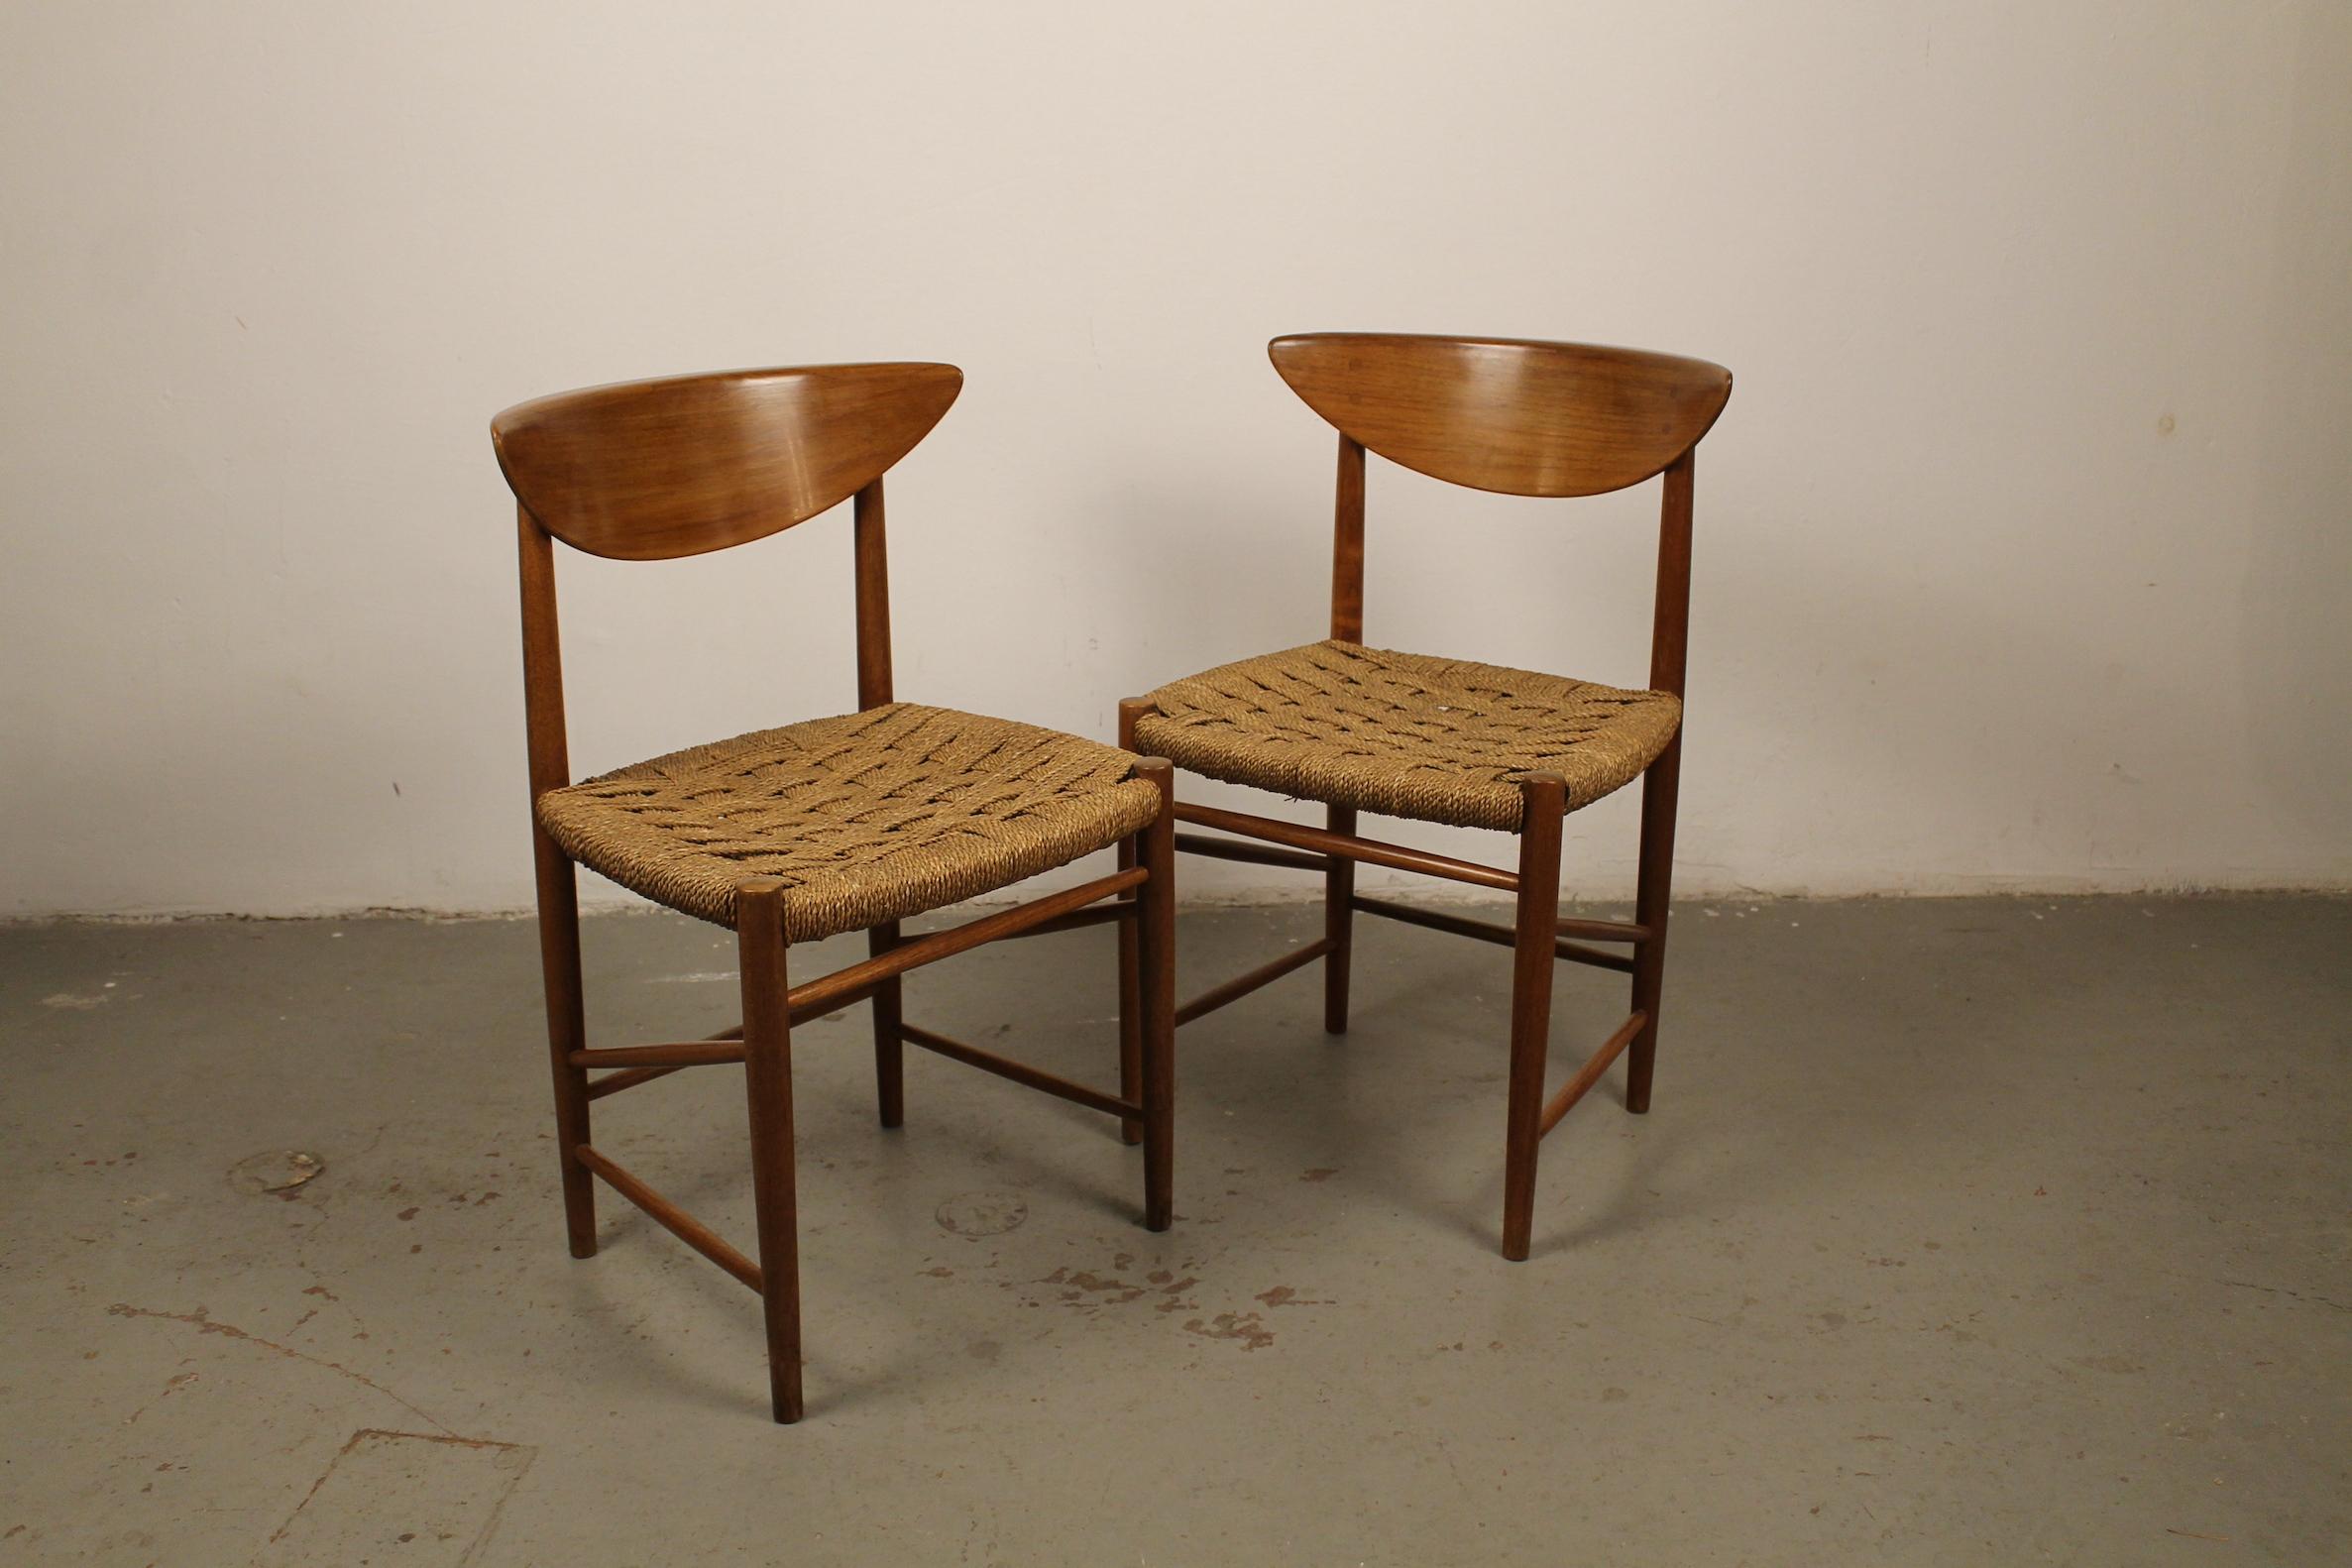 This set of 2 chairs Model 316 has no attribution mark or proof of authenticity, but is documented in the history of design. The designers of this set are Peter Hvidt & Orla Mølgaard-Nielsen in 1950 by Søborg Møbelfabrik in Denmark.
